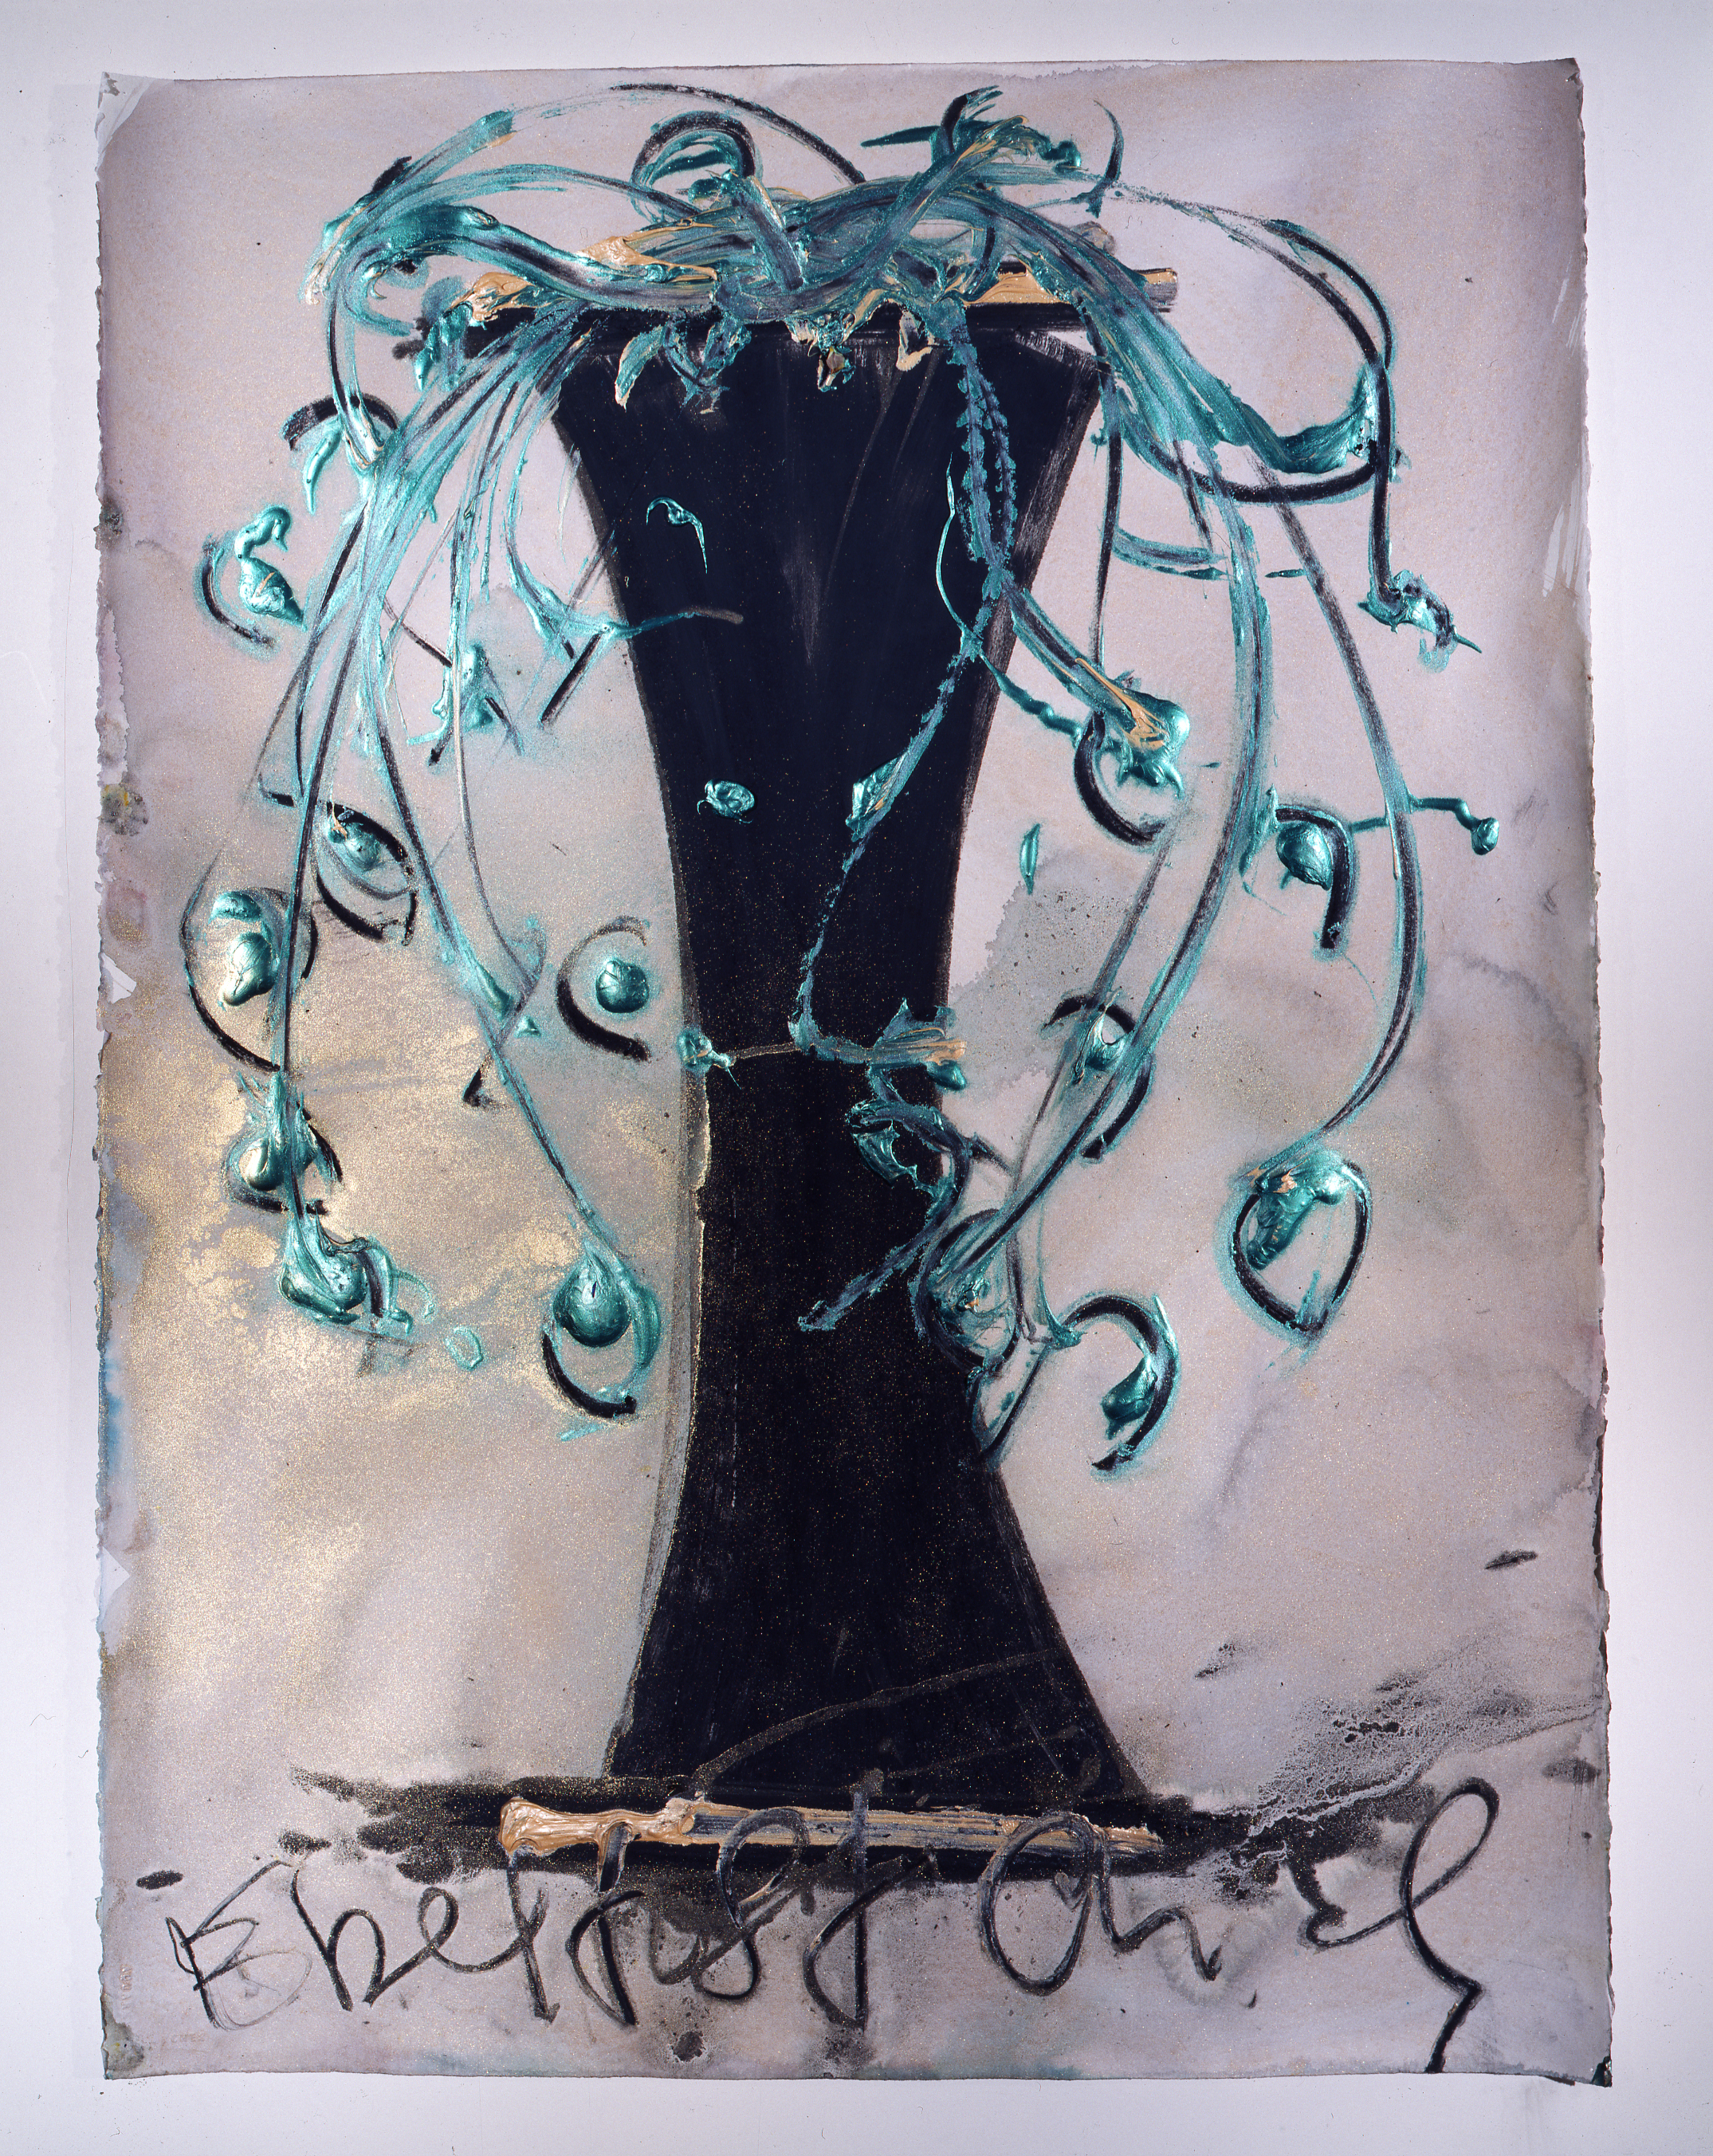  Dale Chihuly,&nbsp; Ebeltoft Drawing,&nbsp; (1991, mixed media on paper, 30 x 22 inches), DC.357 